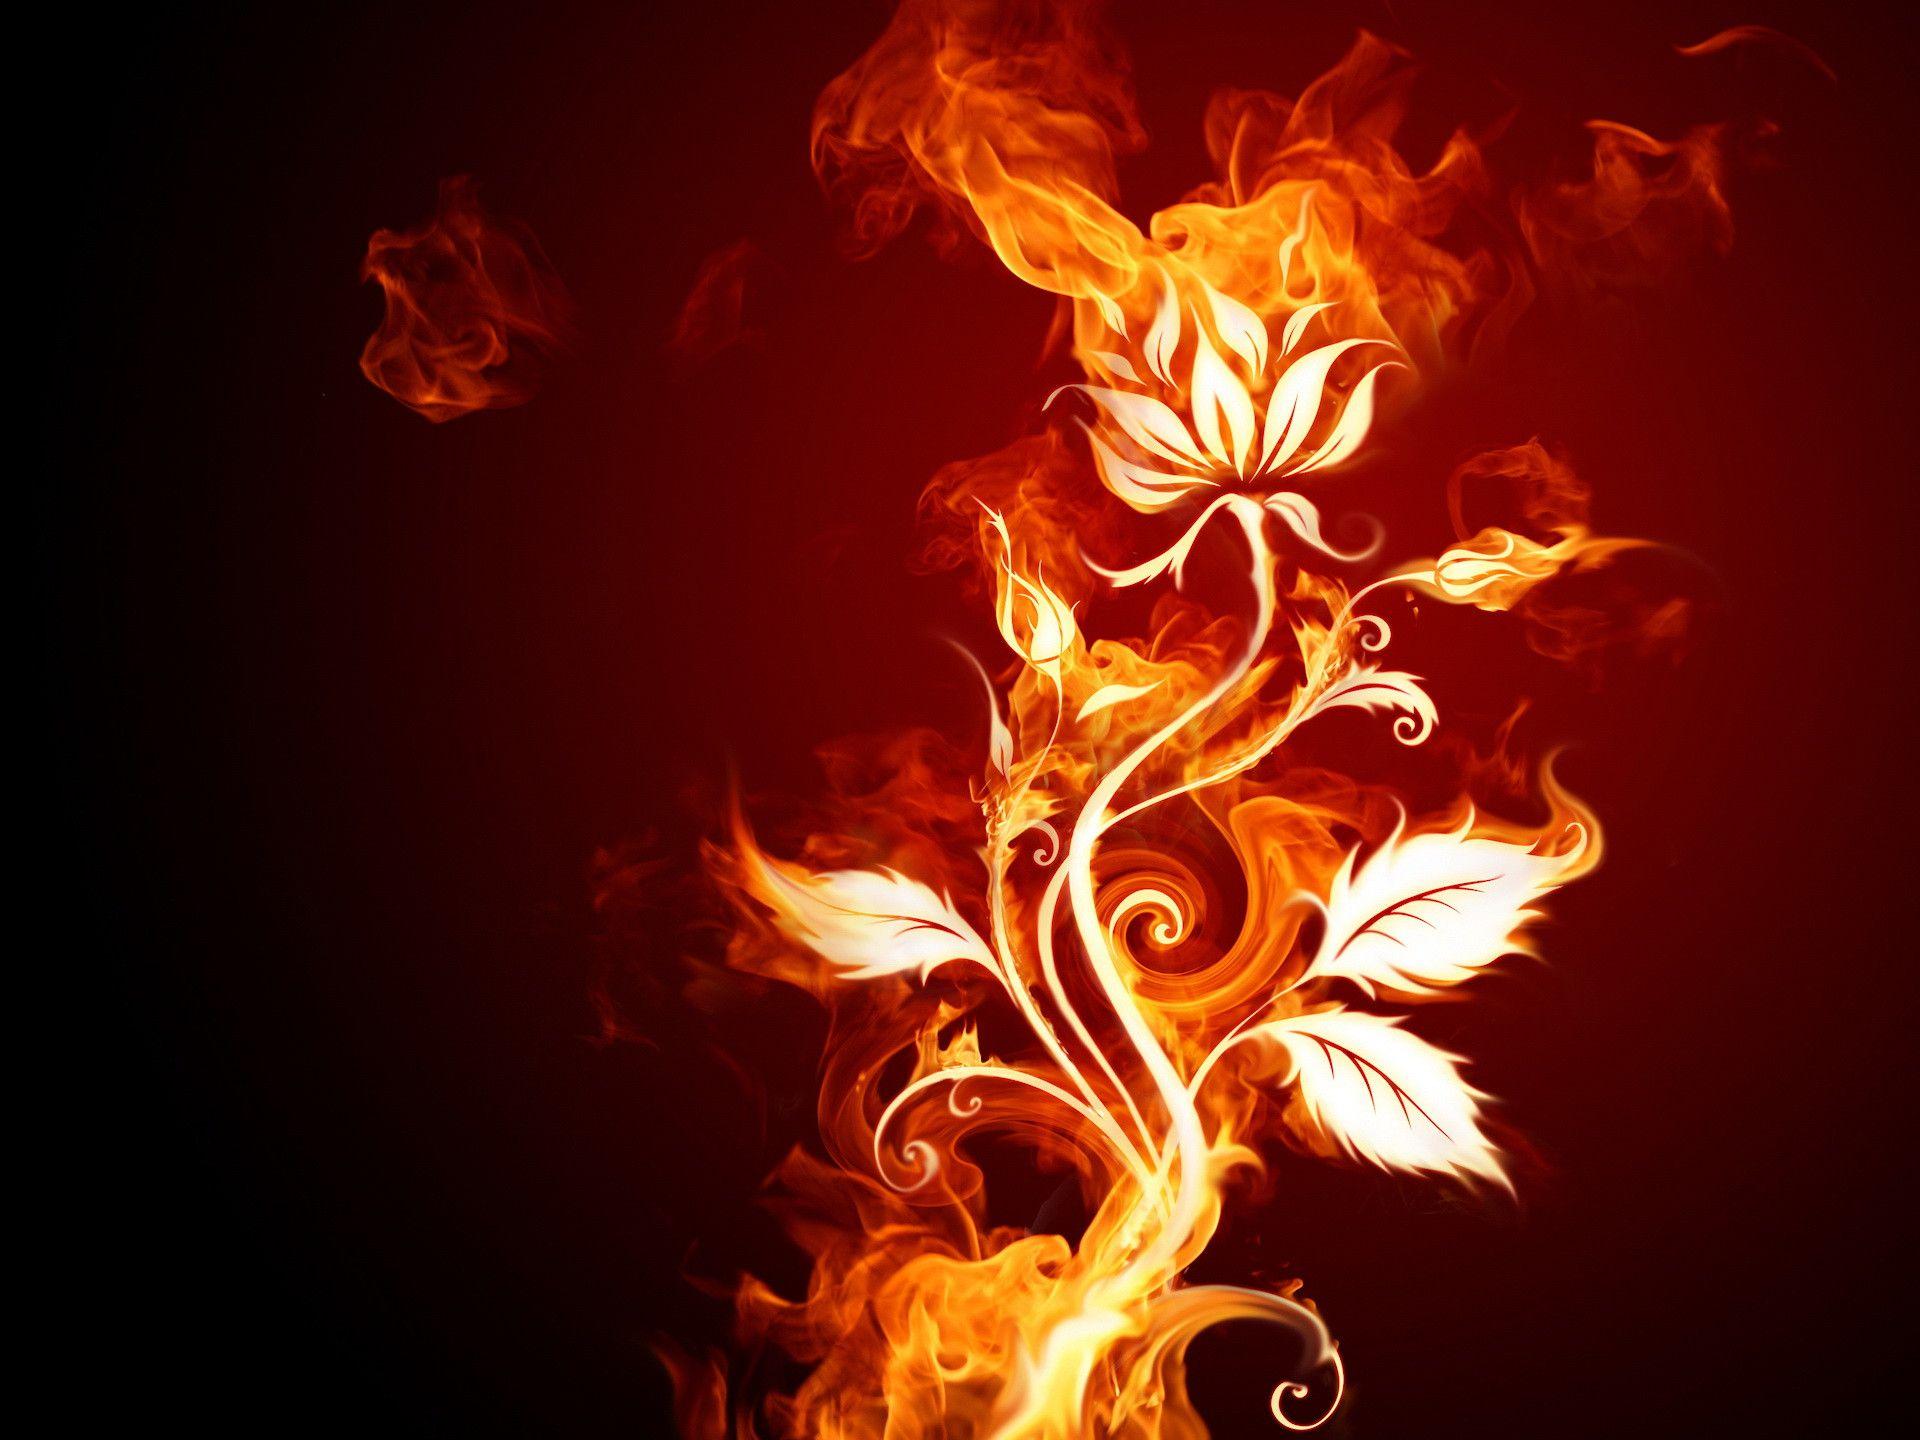 Flower On Fire Background Images and Wallpapers – YL Computing